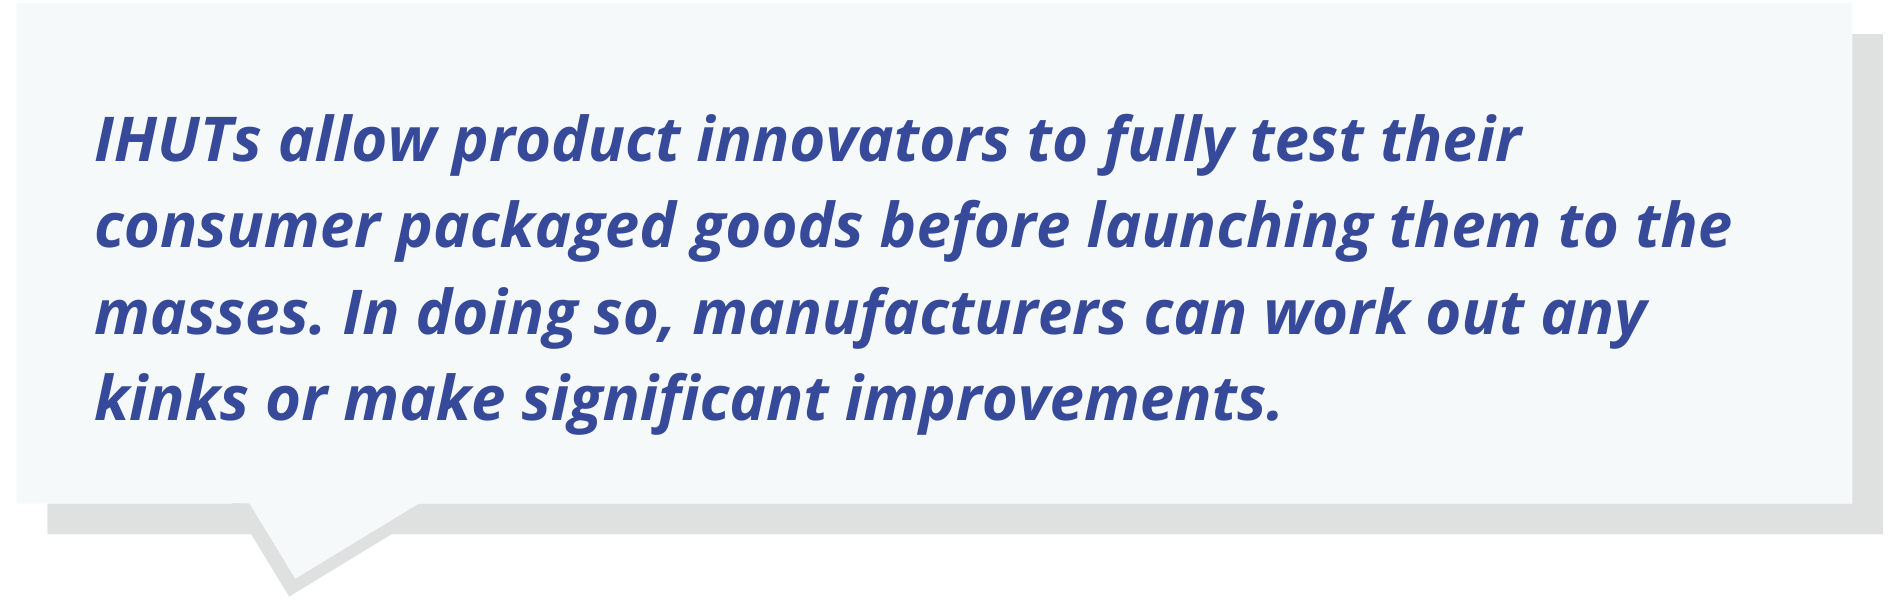 Quote Text: IHUTs allow product innovators to fully test their consumer packaged goods before launching them to the masses. In doing so, manufacturers can work out any kinks or make significant improvements.